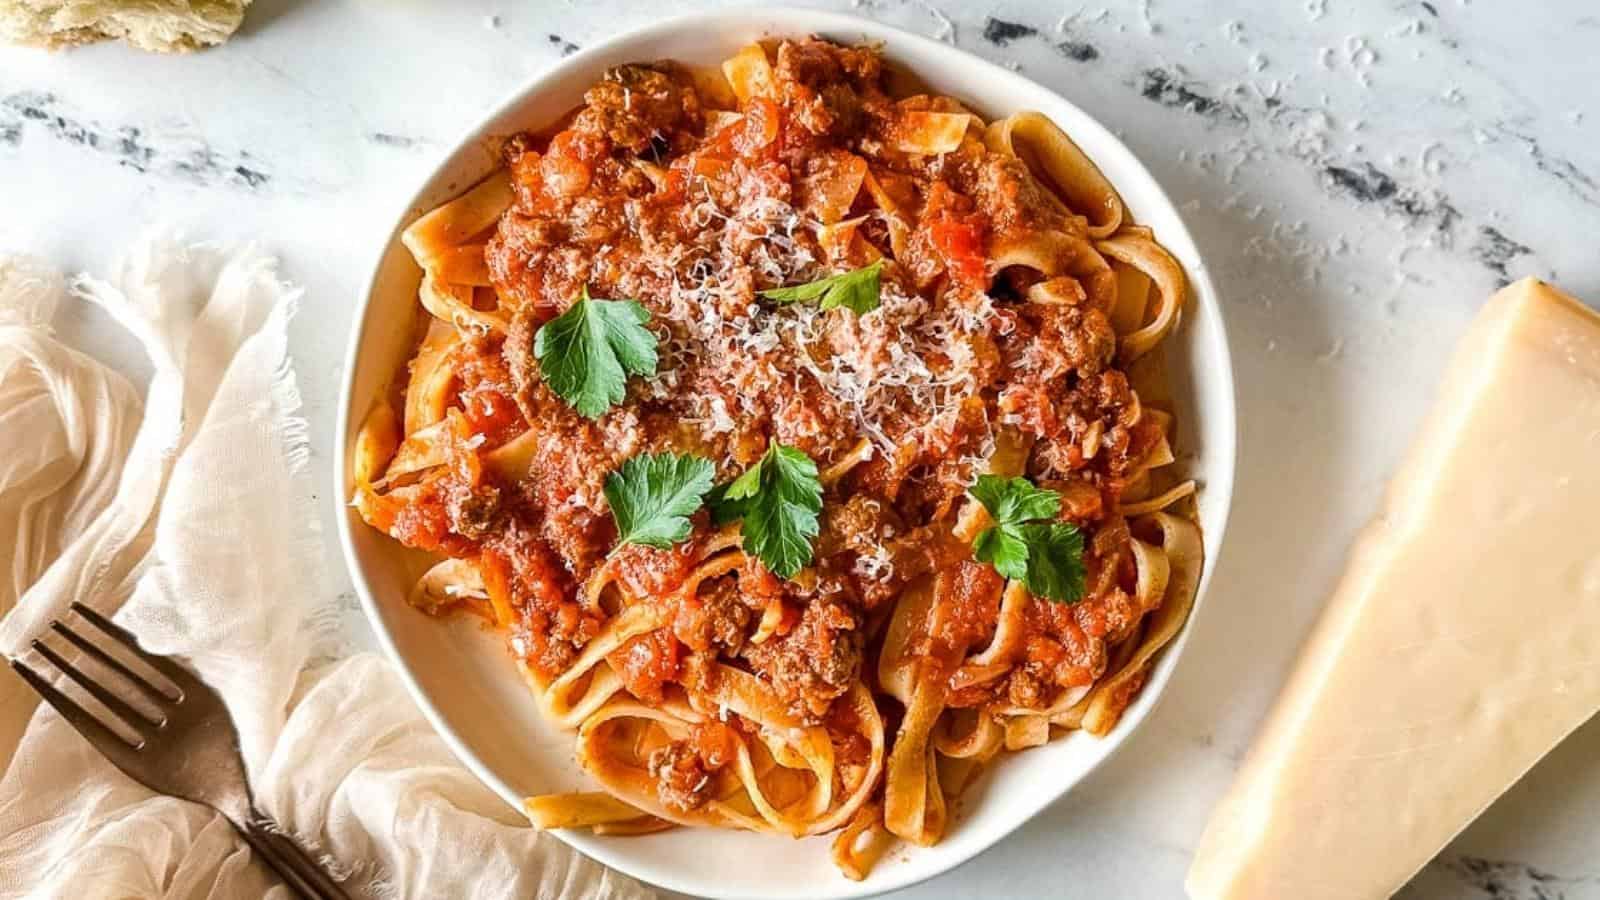 a plate of slow cooker lamb ragu over pappardelle pasta surrounded by a block of parmesan, a white linen, and torn baguette.